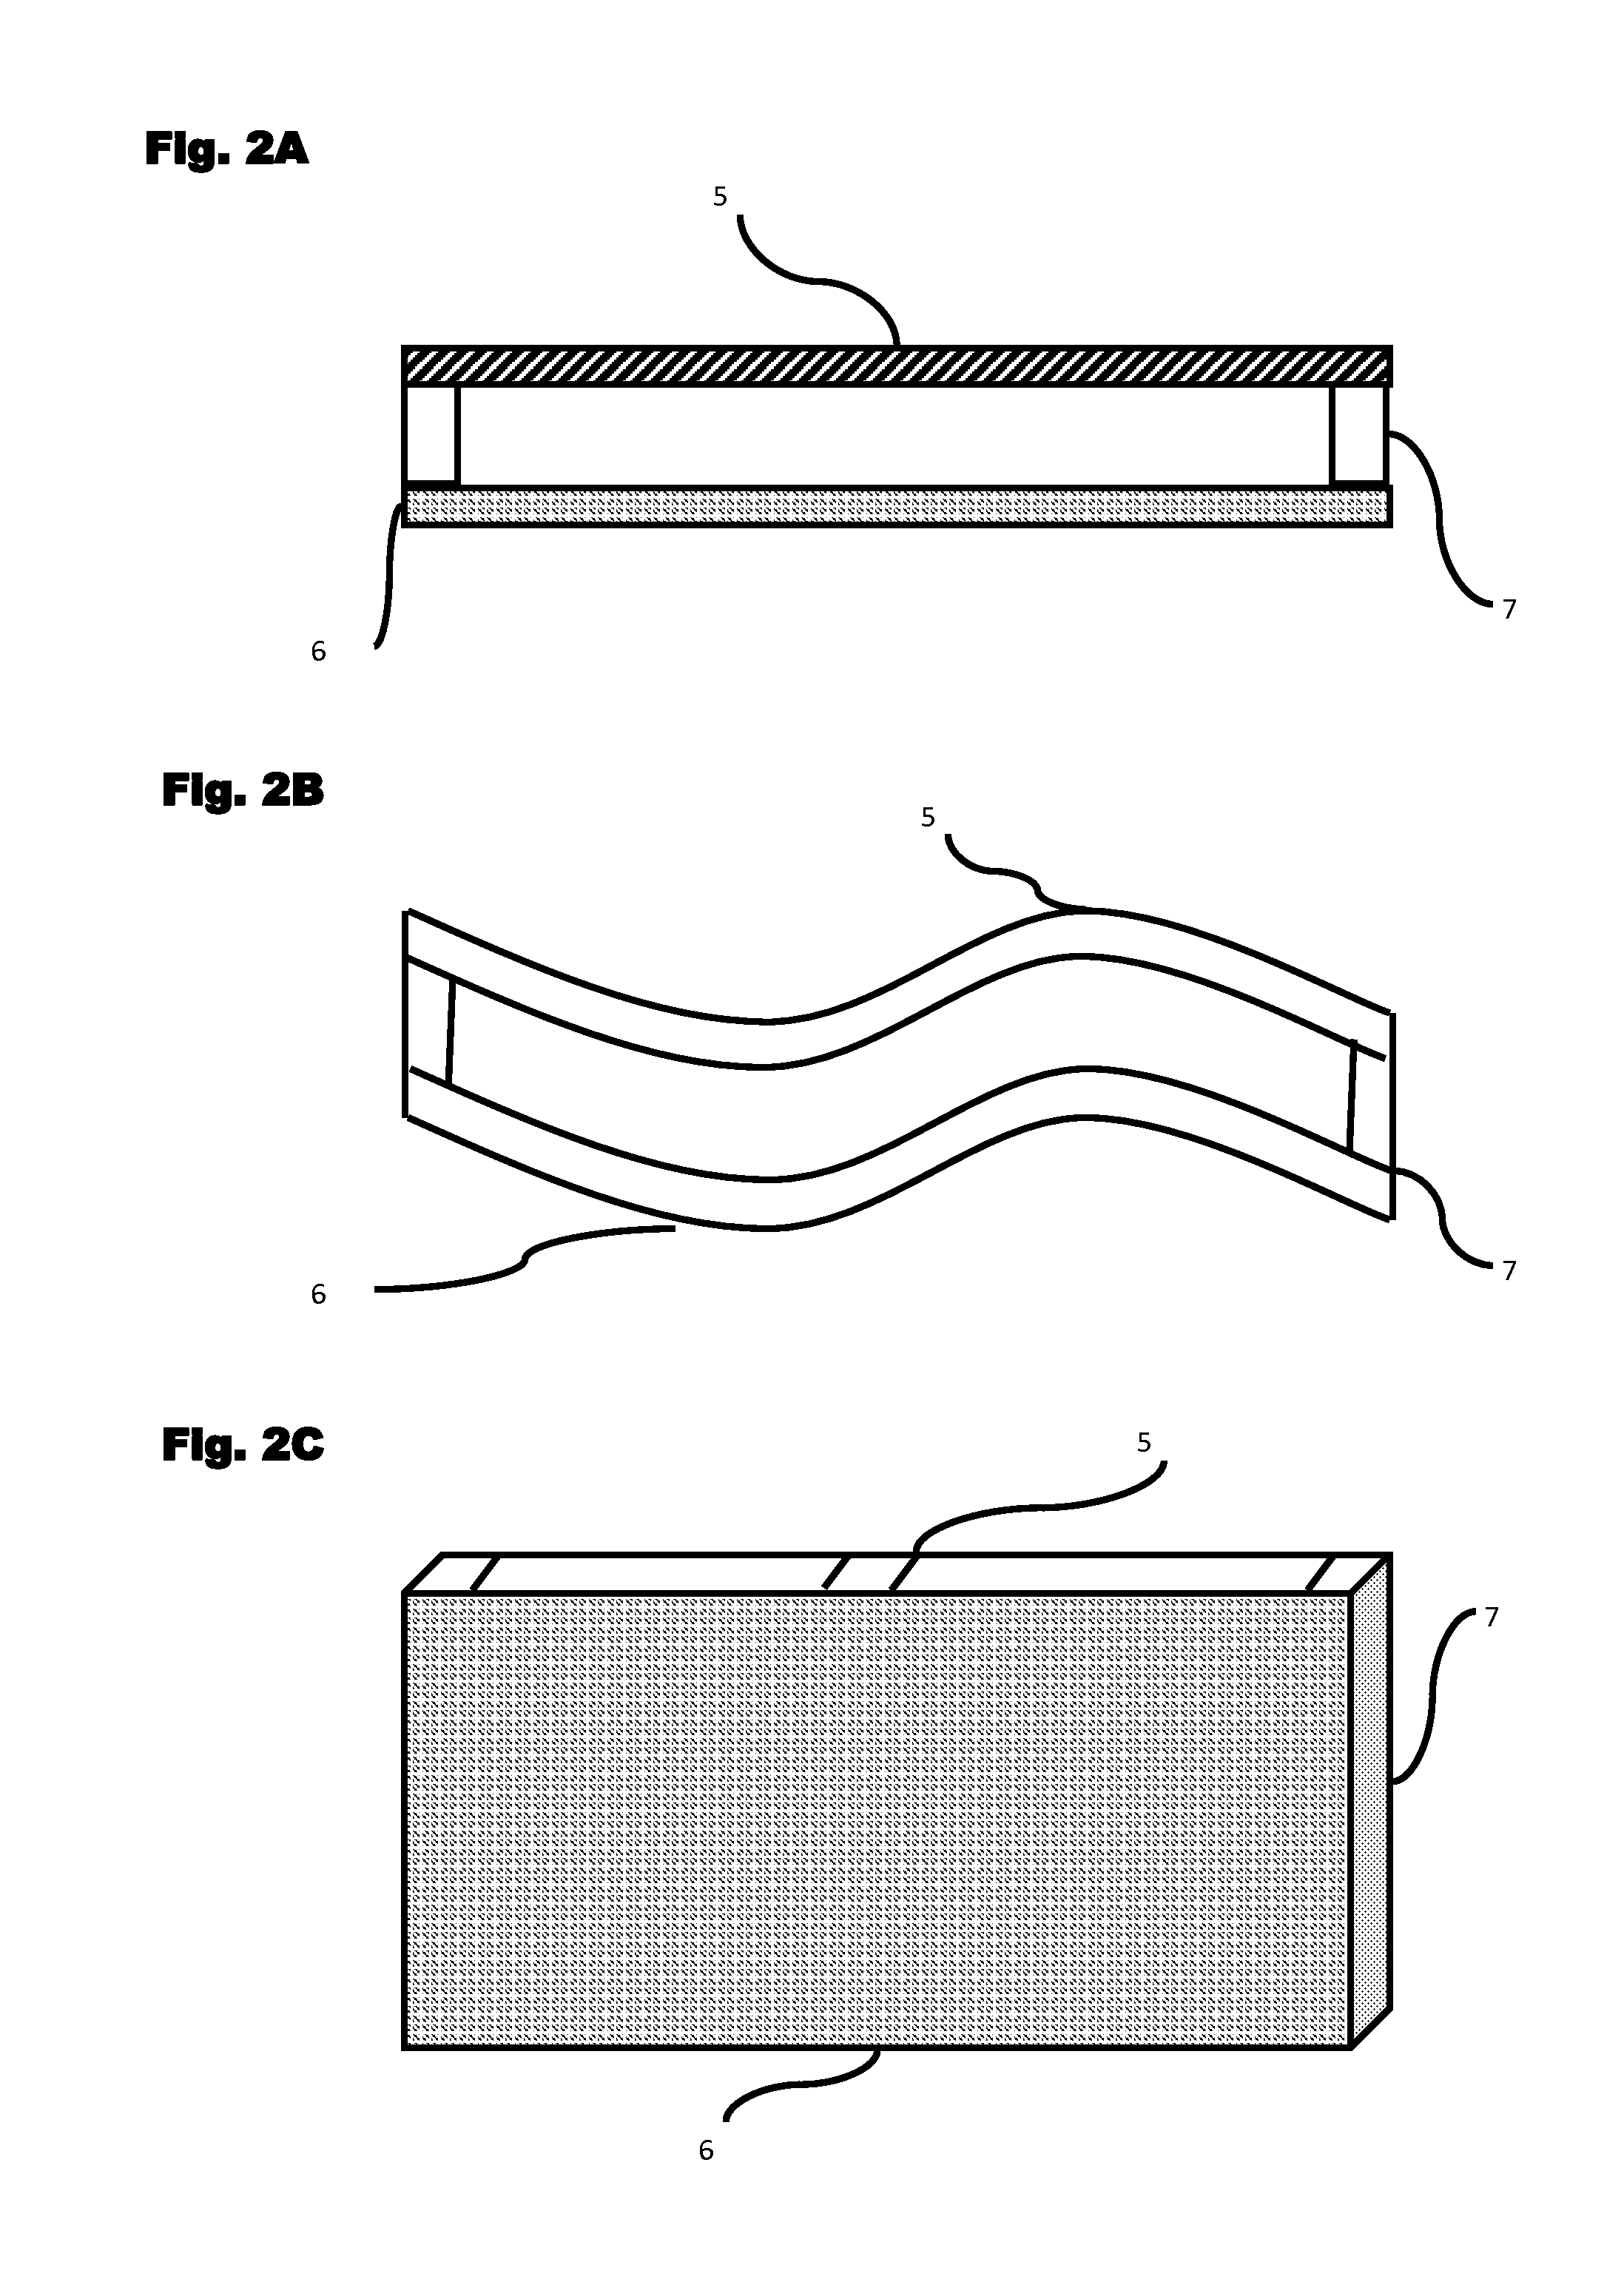 Electrolysis Remediation Device and Method